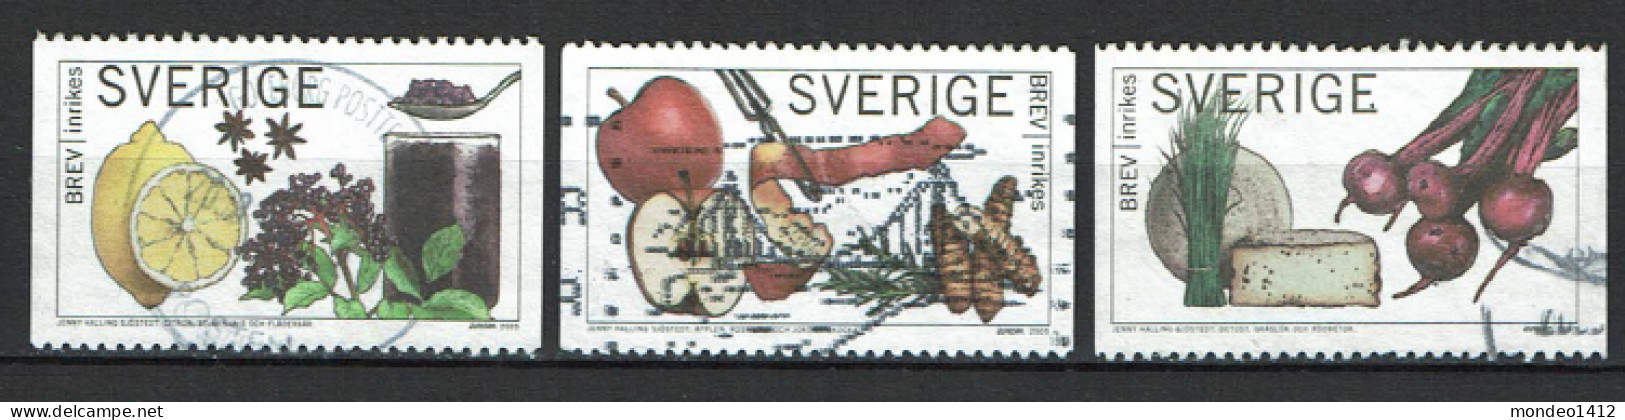 Sweden 2005 - Europa, Gastronomie, Gastronomy - Used - Used Stamps